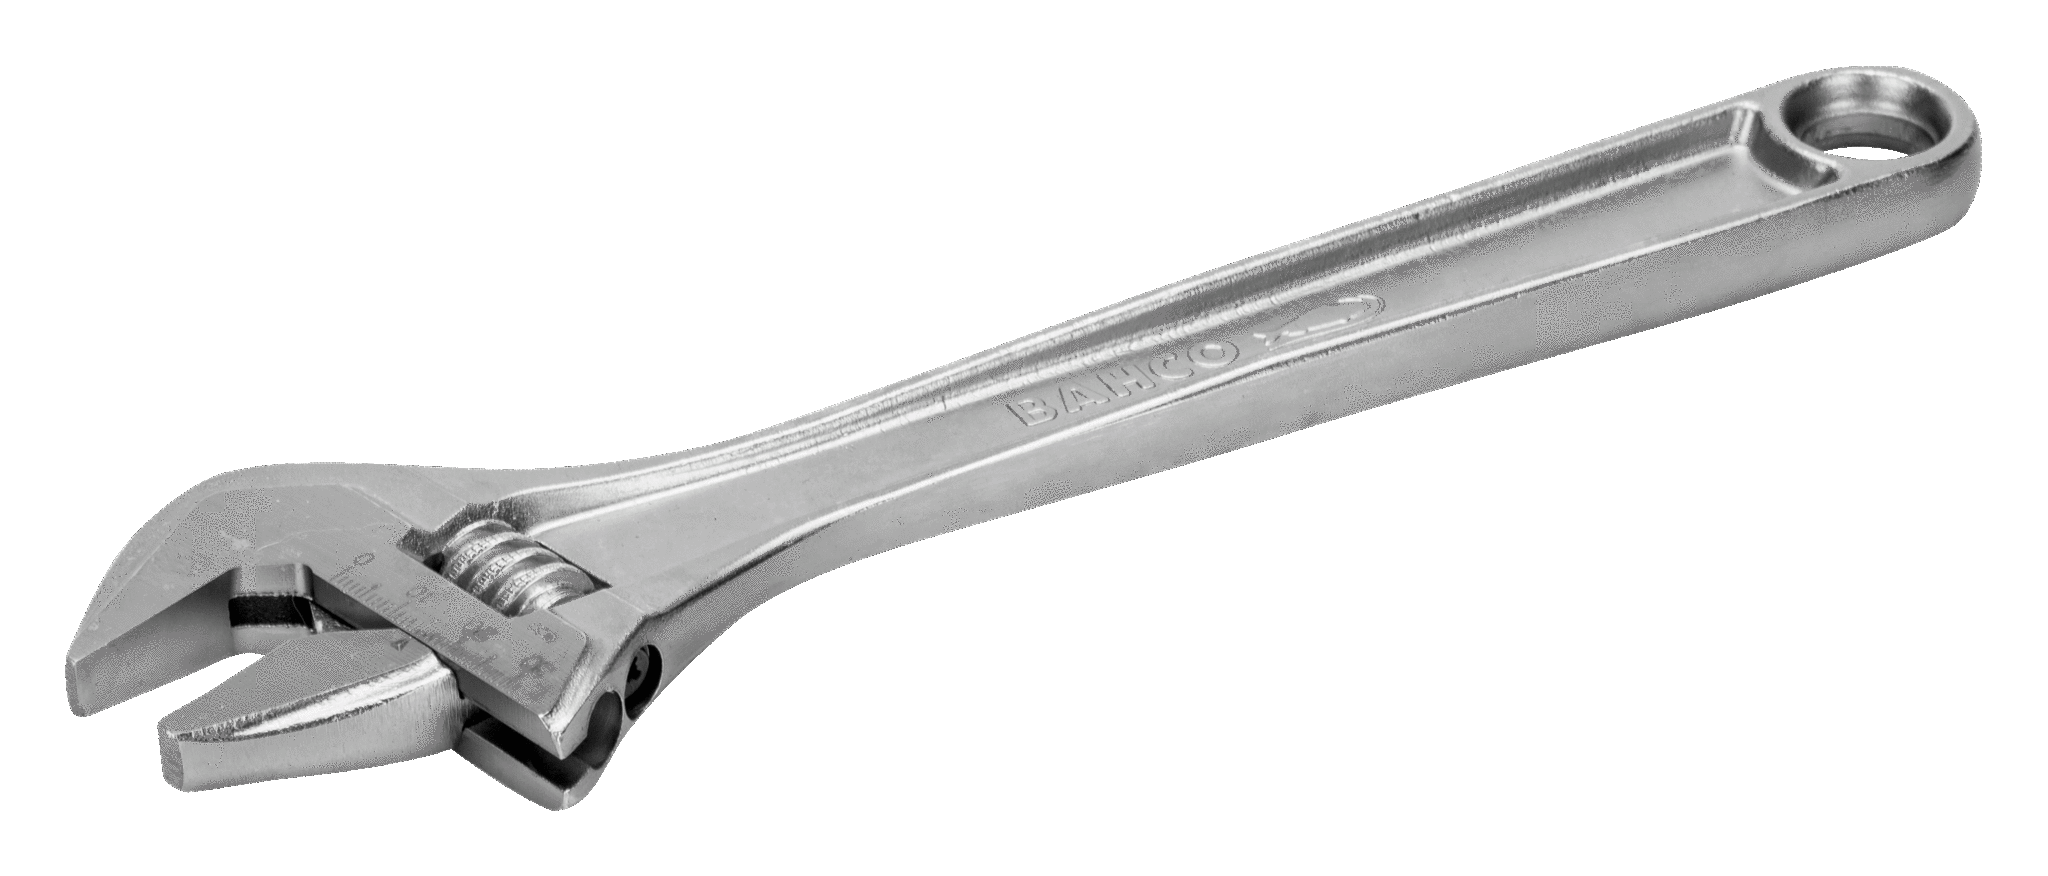 Silver 18-Inch 53 mm Bahco 8075 IR8075 C IP Adjustable Wrench in Industrial Pack 